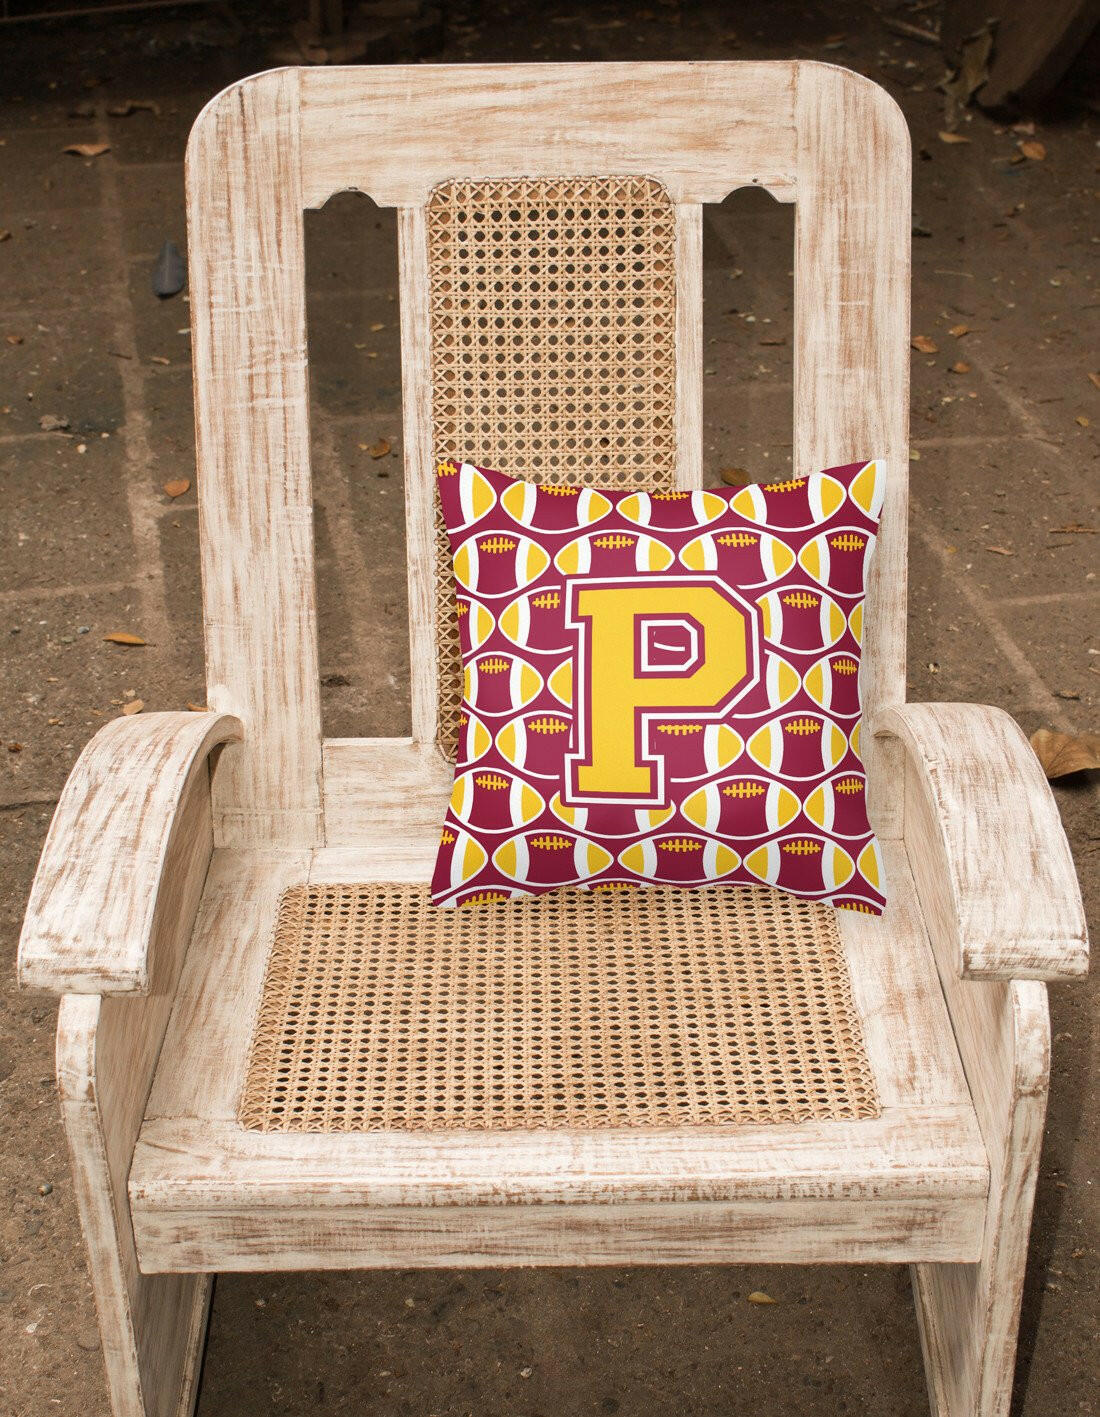 Letter P Football Maroon and Gold Fabric Decorative Pillow CJ1081-PPW1414 by Caroline's Treasures